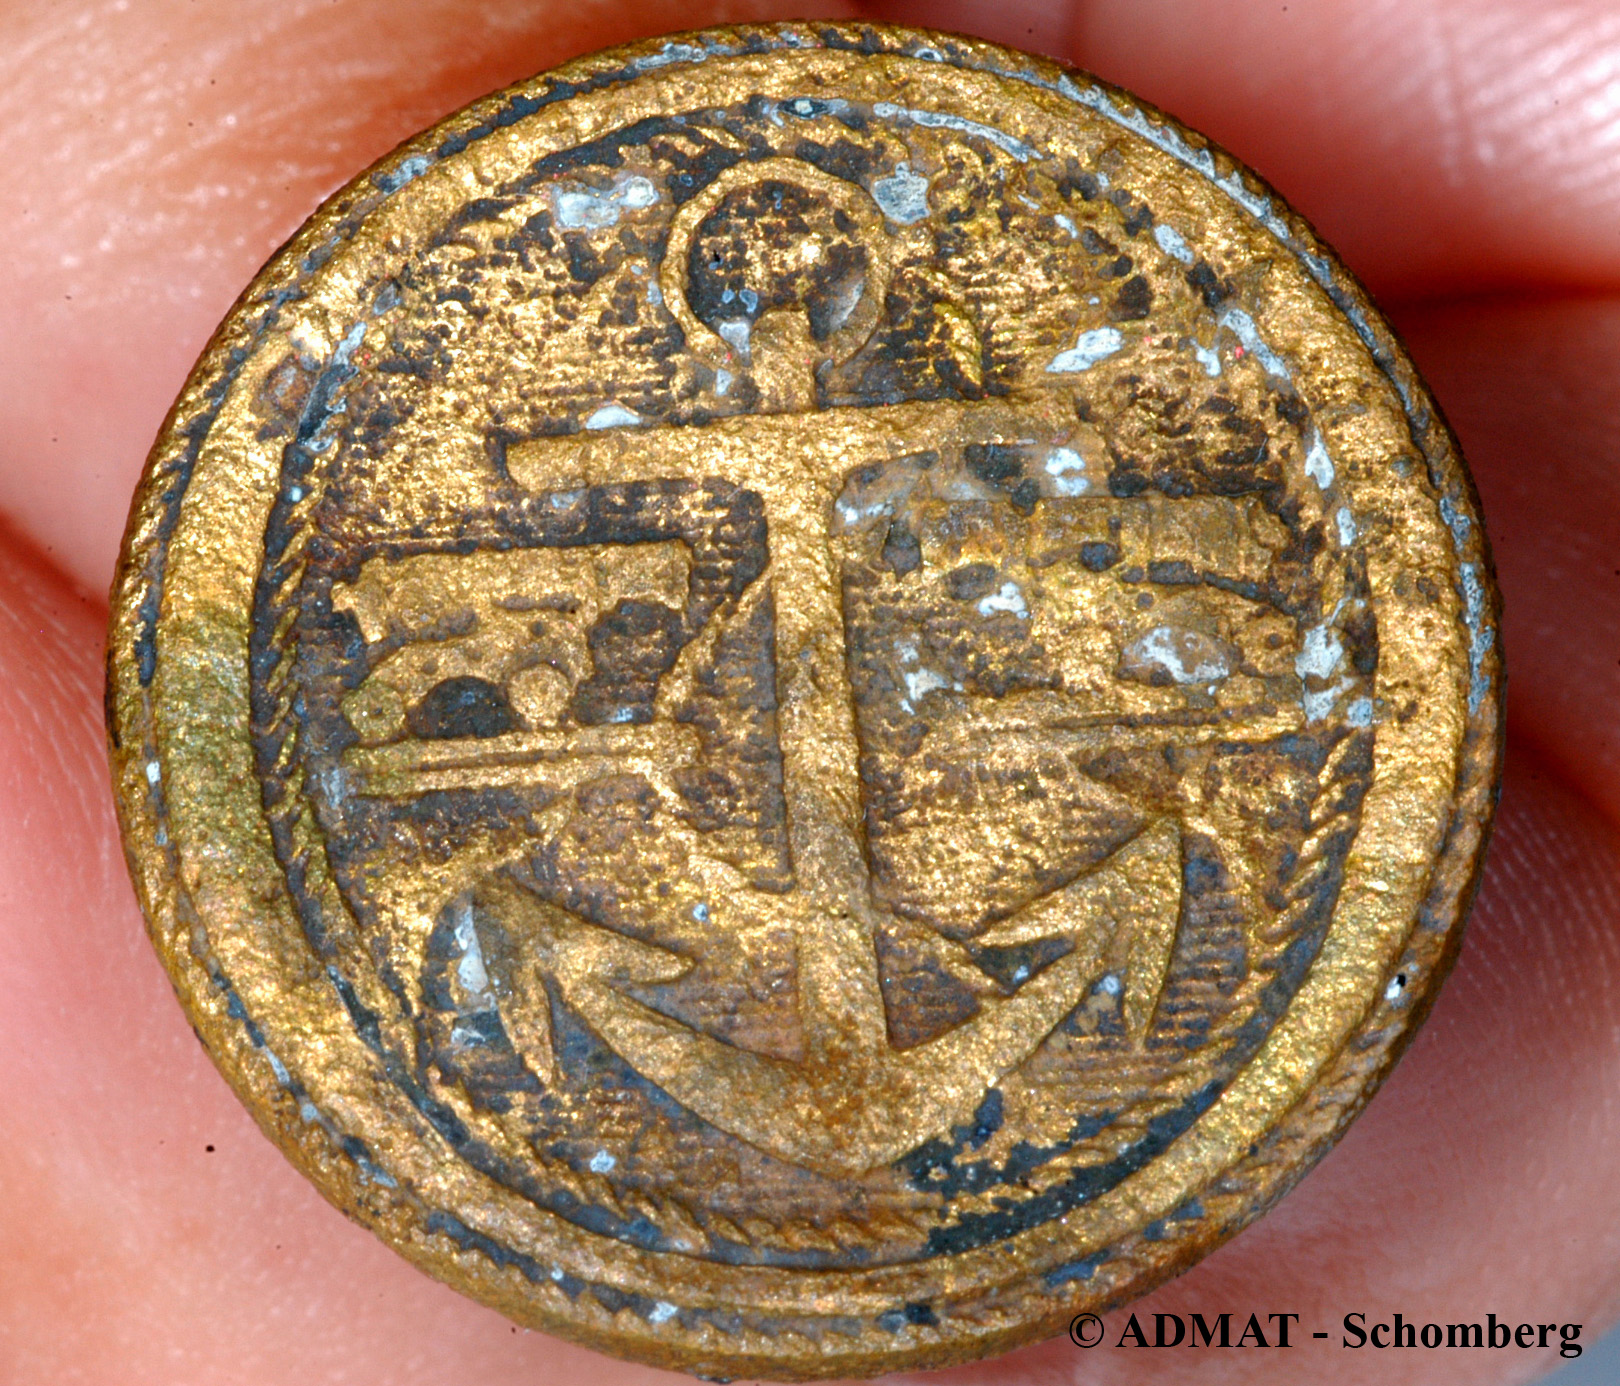  One of two gilt covered copper alloy English gunnery officers buttons found in the hold of the wreck 